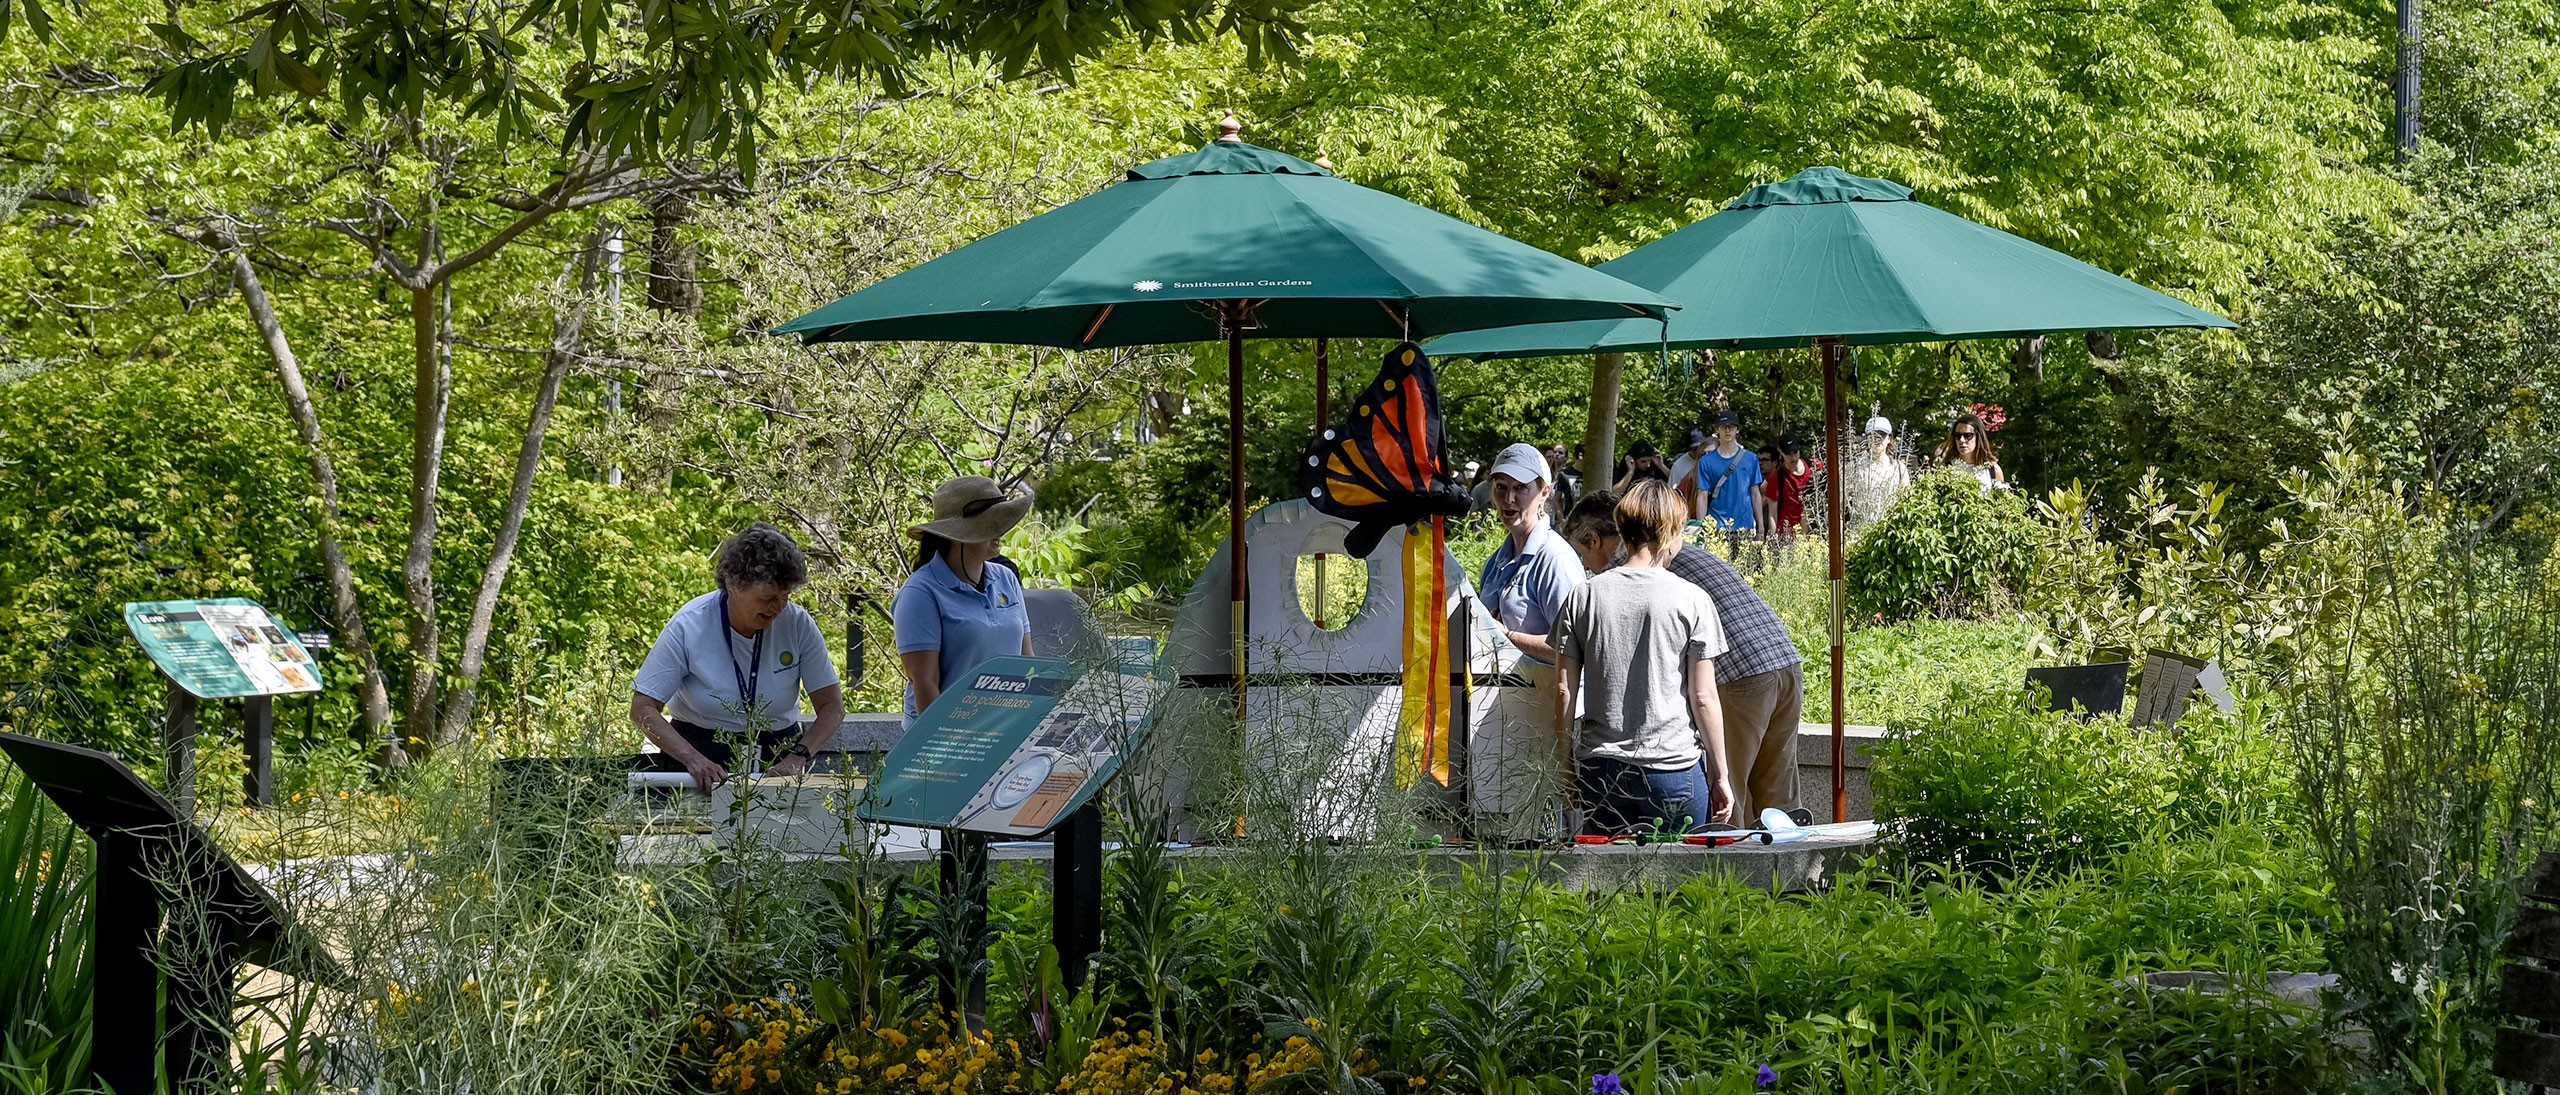 Staff setting up green shade umbrellas, large windsock bugs and other supplies in Pollinator Garden